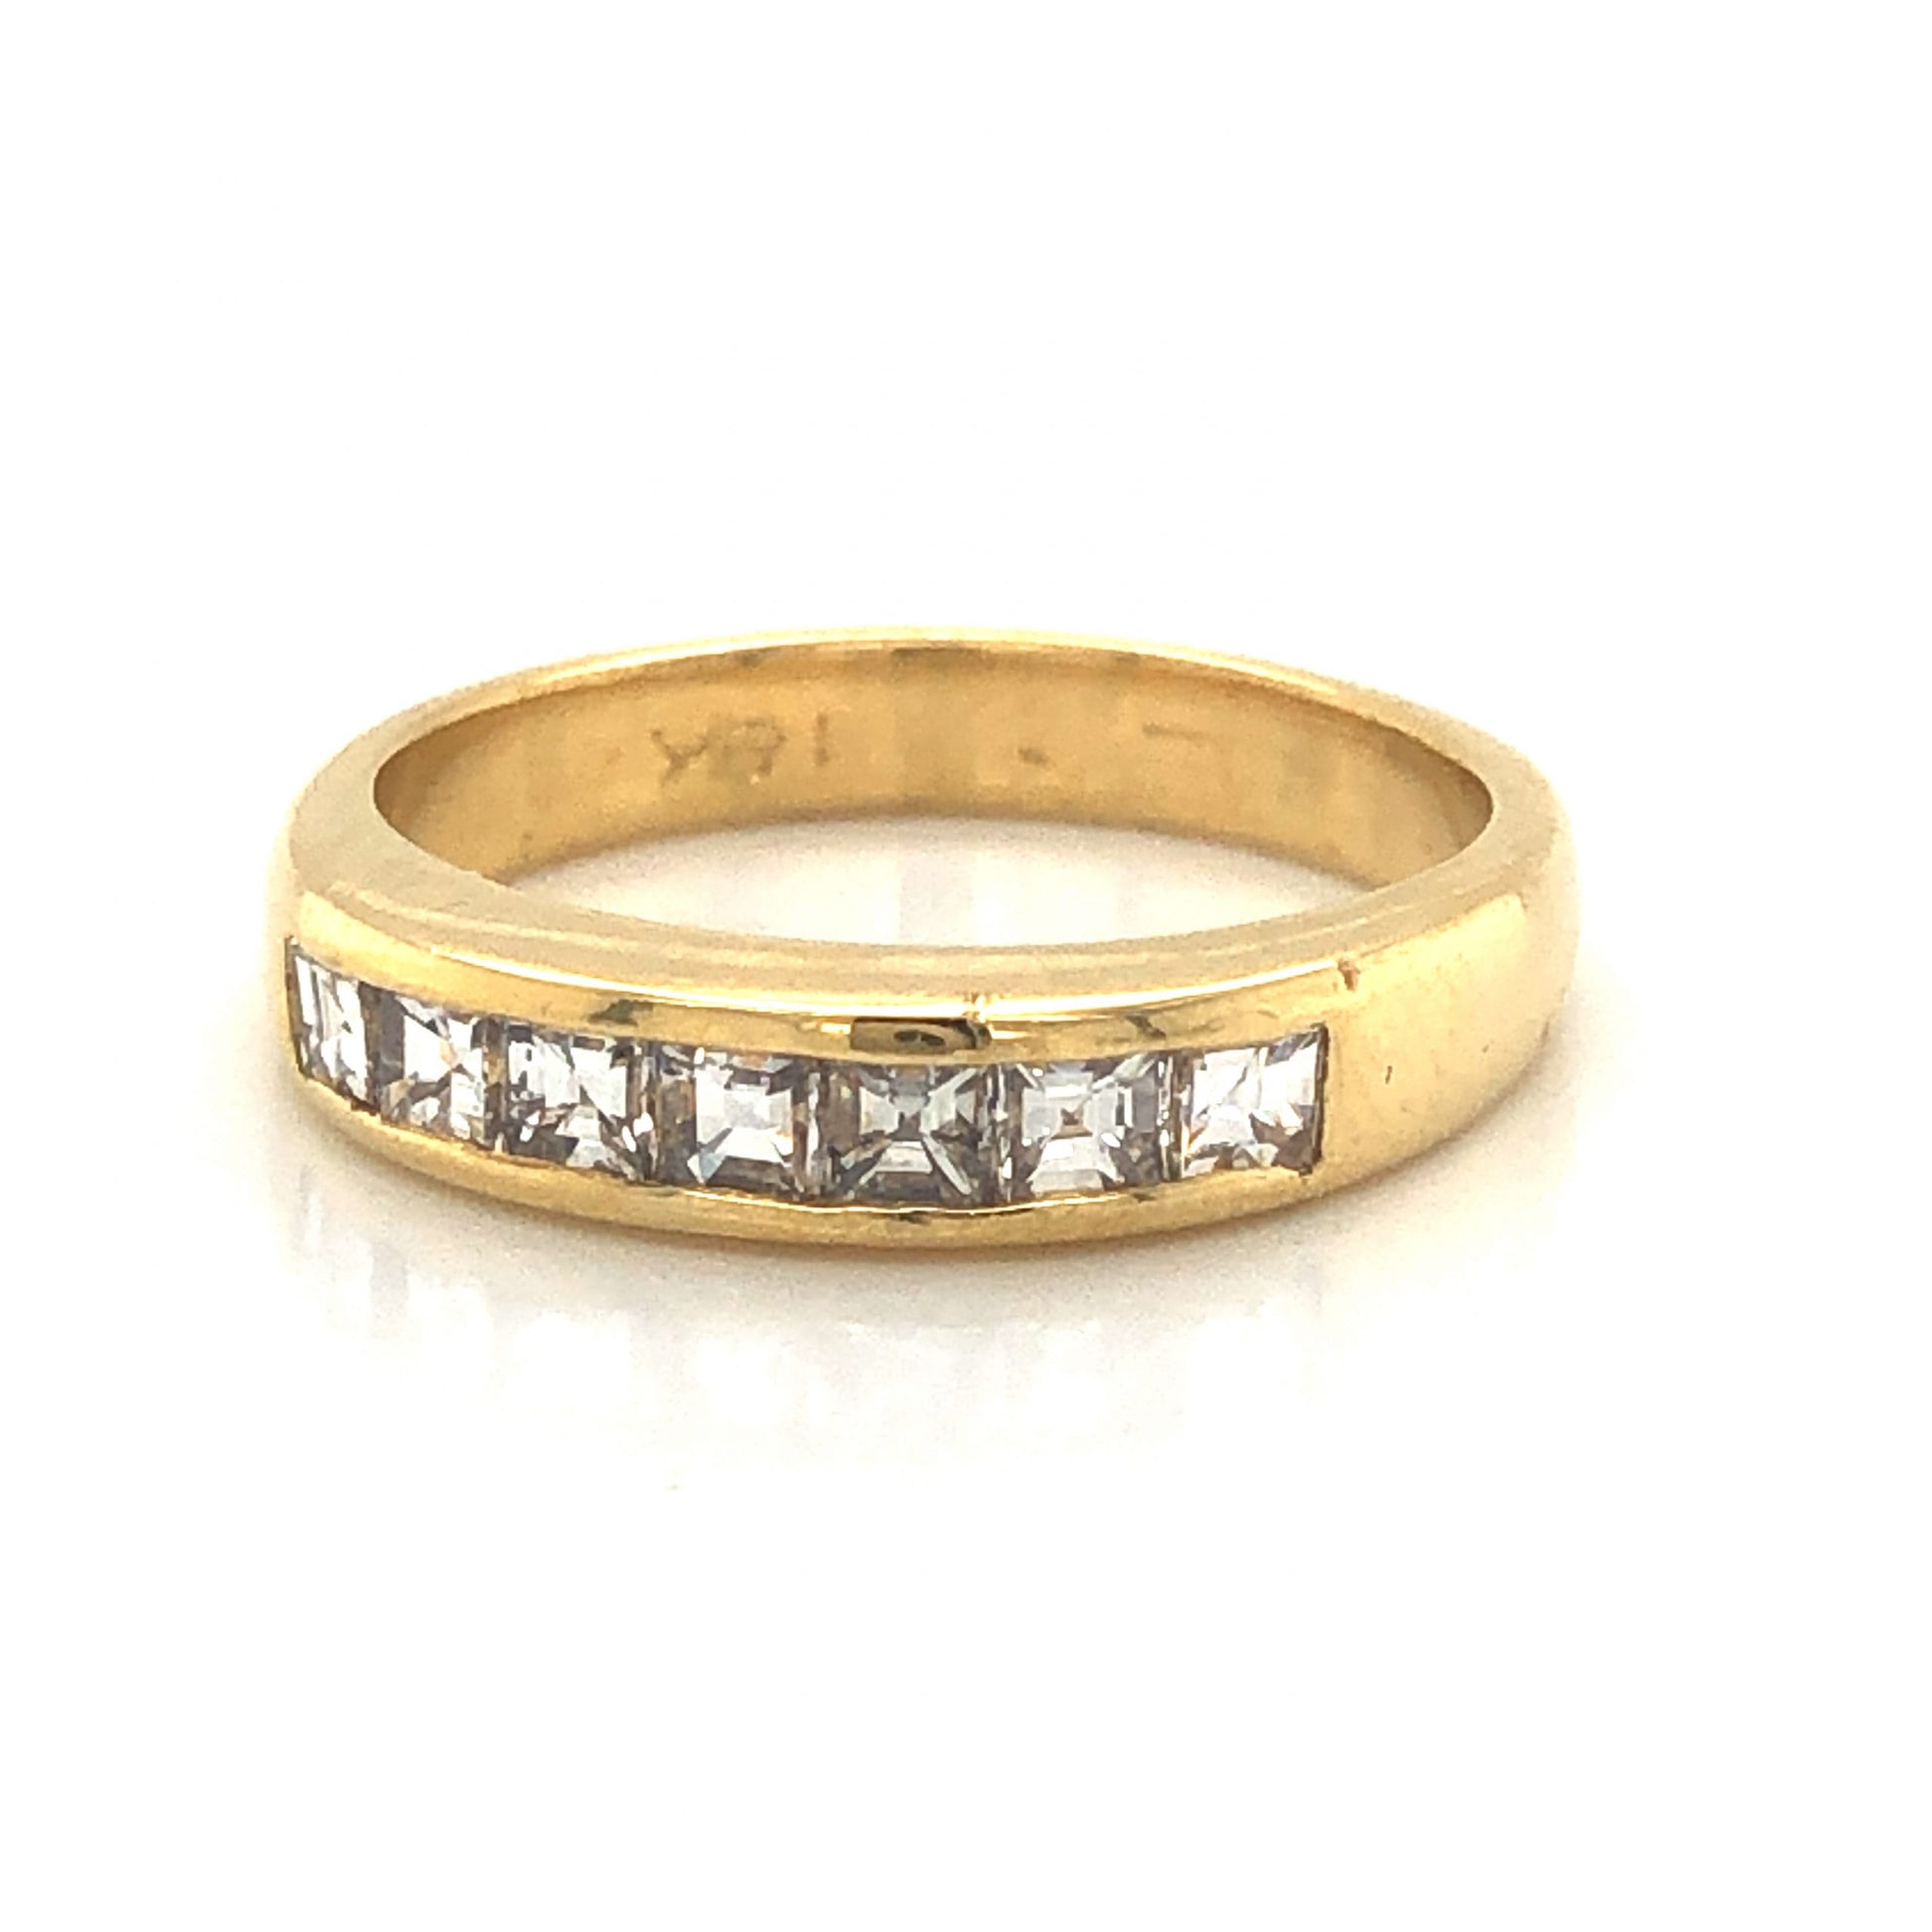 Square Step Cut Diamond Wedding Band in 18k Yellow Gold